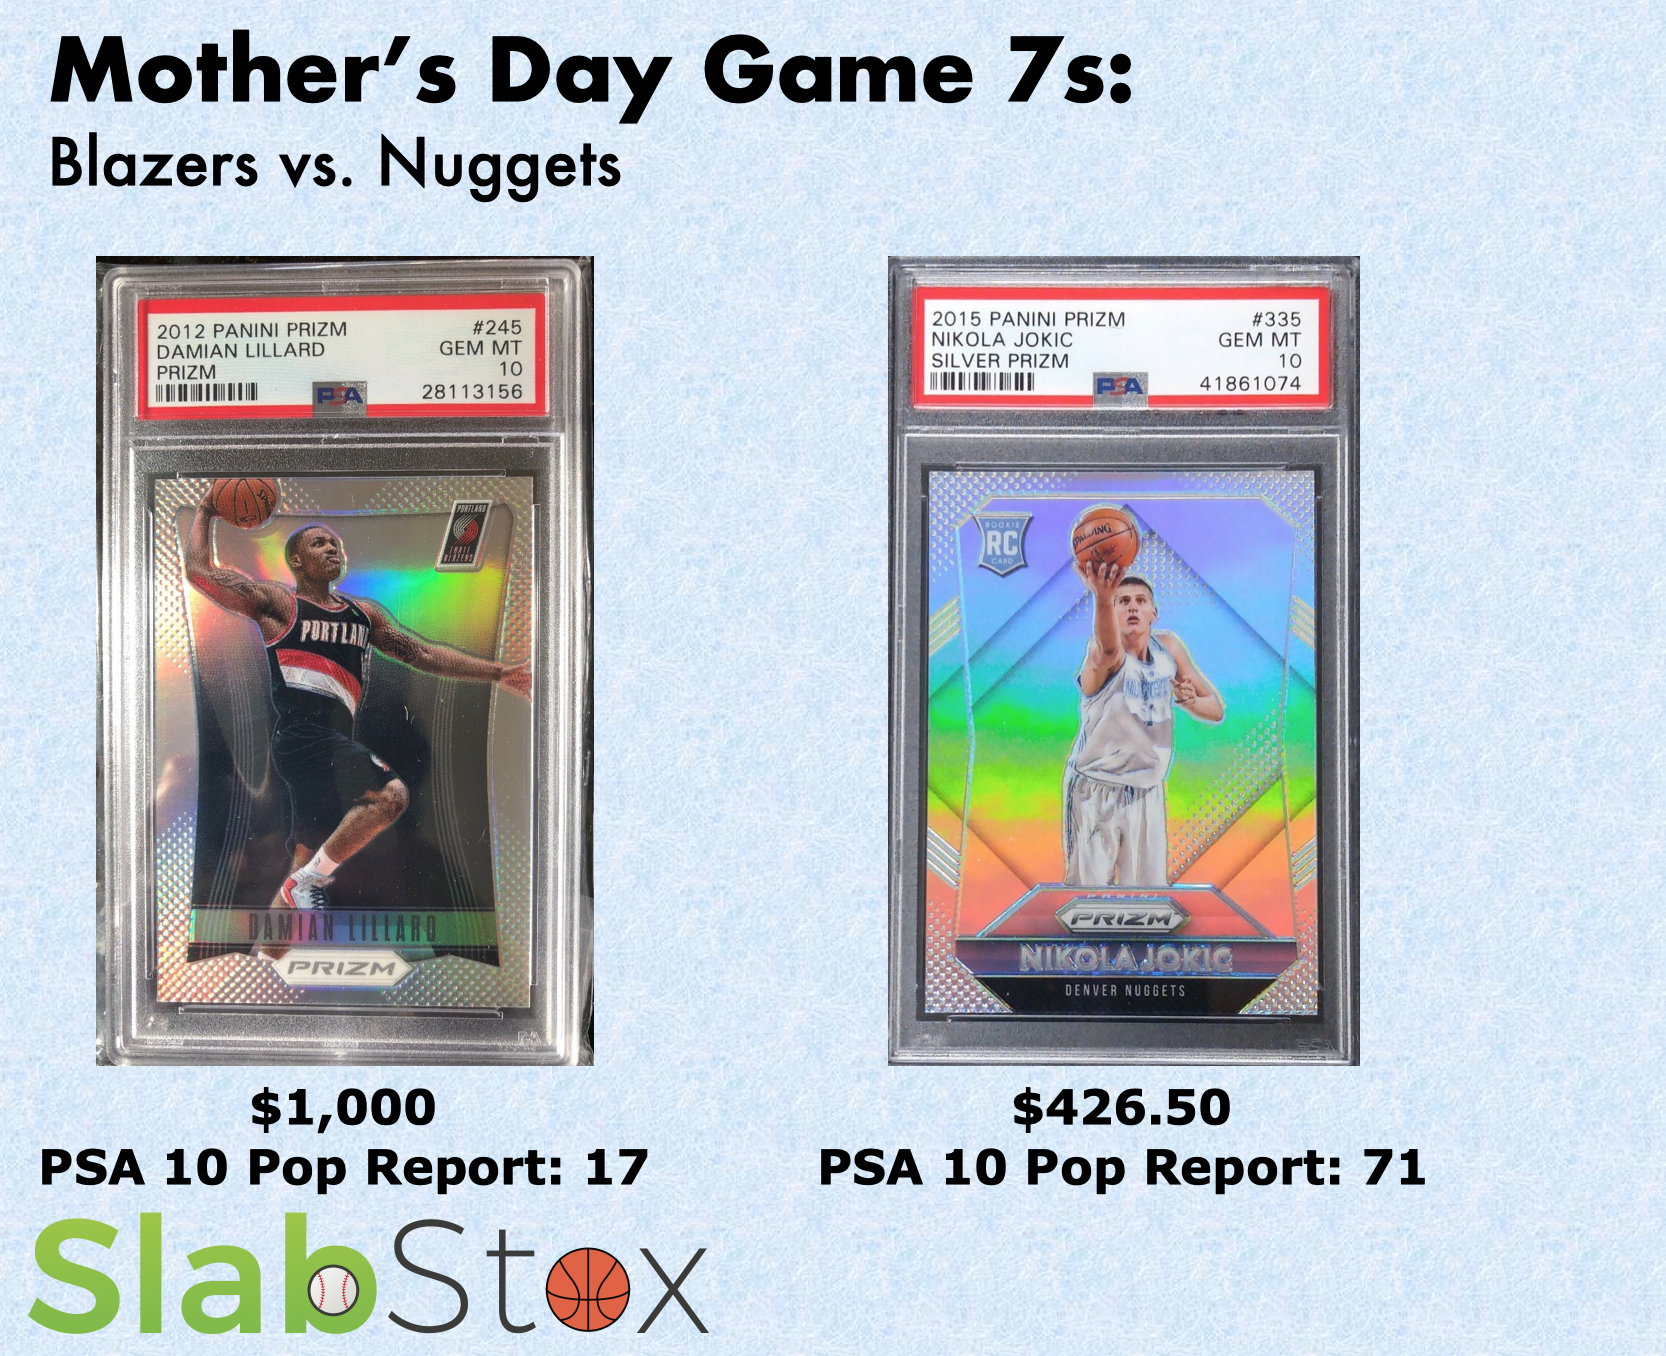 SlabStox graphic of Mothers' Day Game 7s: Blazers vs. Nuggets featuring two sports trading cards